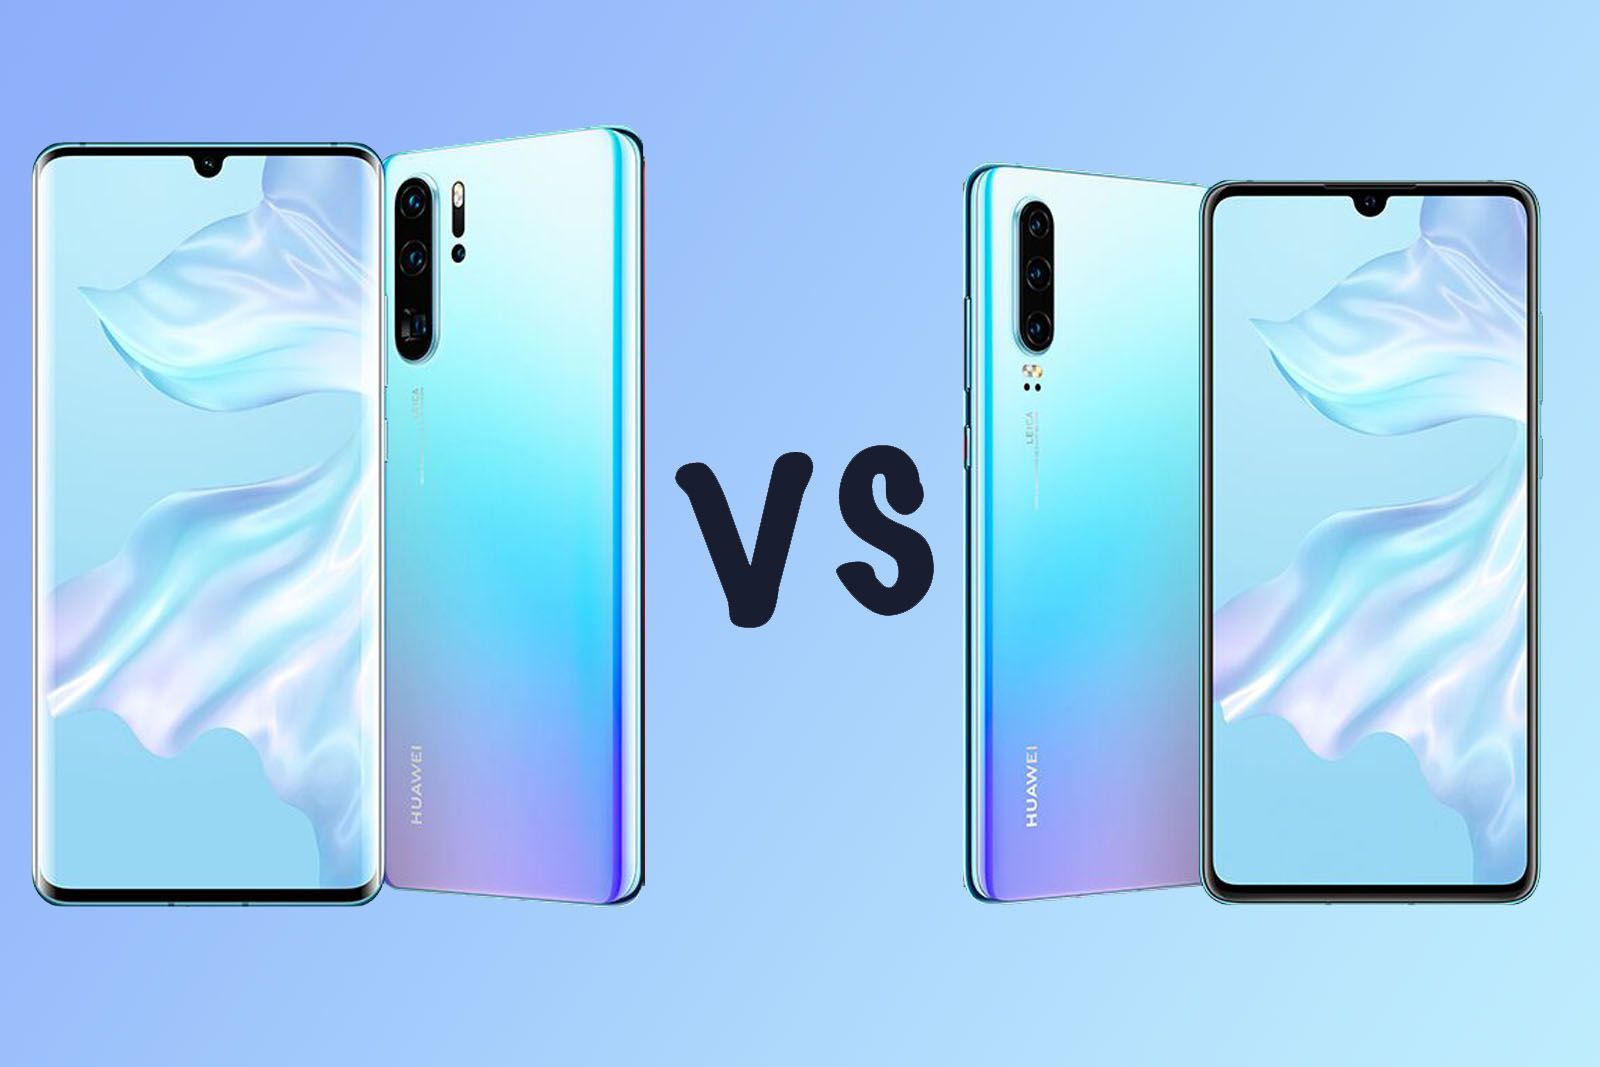 Huawei P30 Vs P30 Pro Which Should You Consider Buying image 1